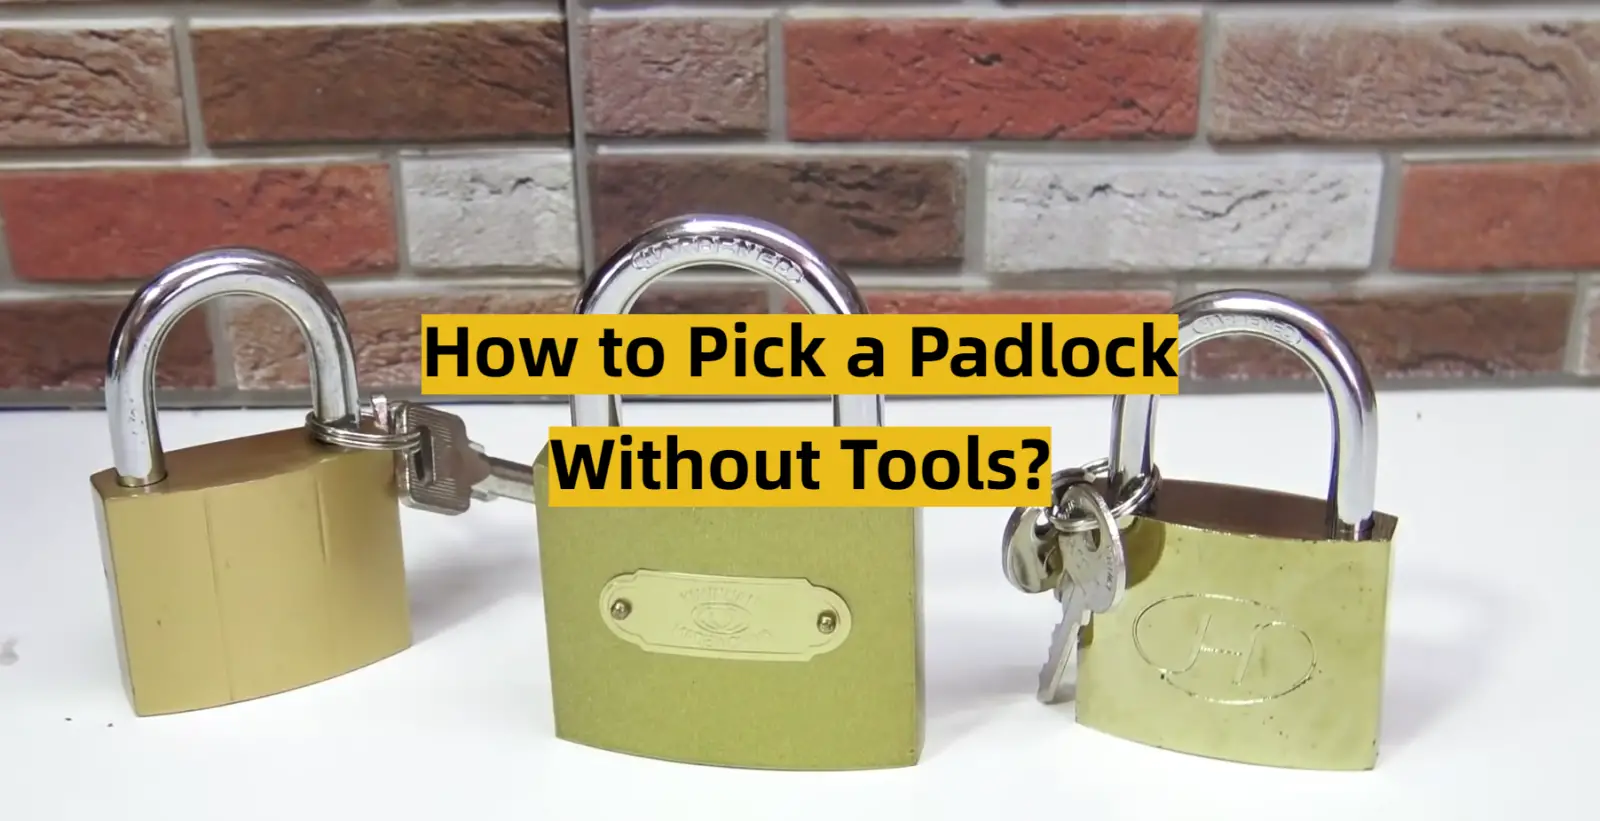 How to Pick a Padlock Without Tools?